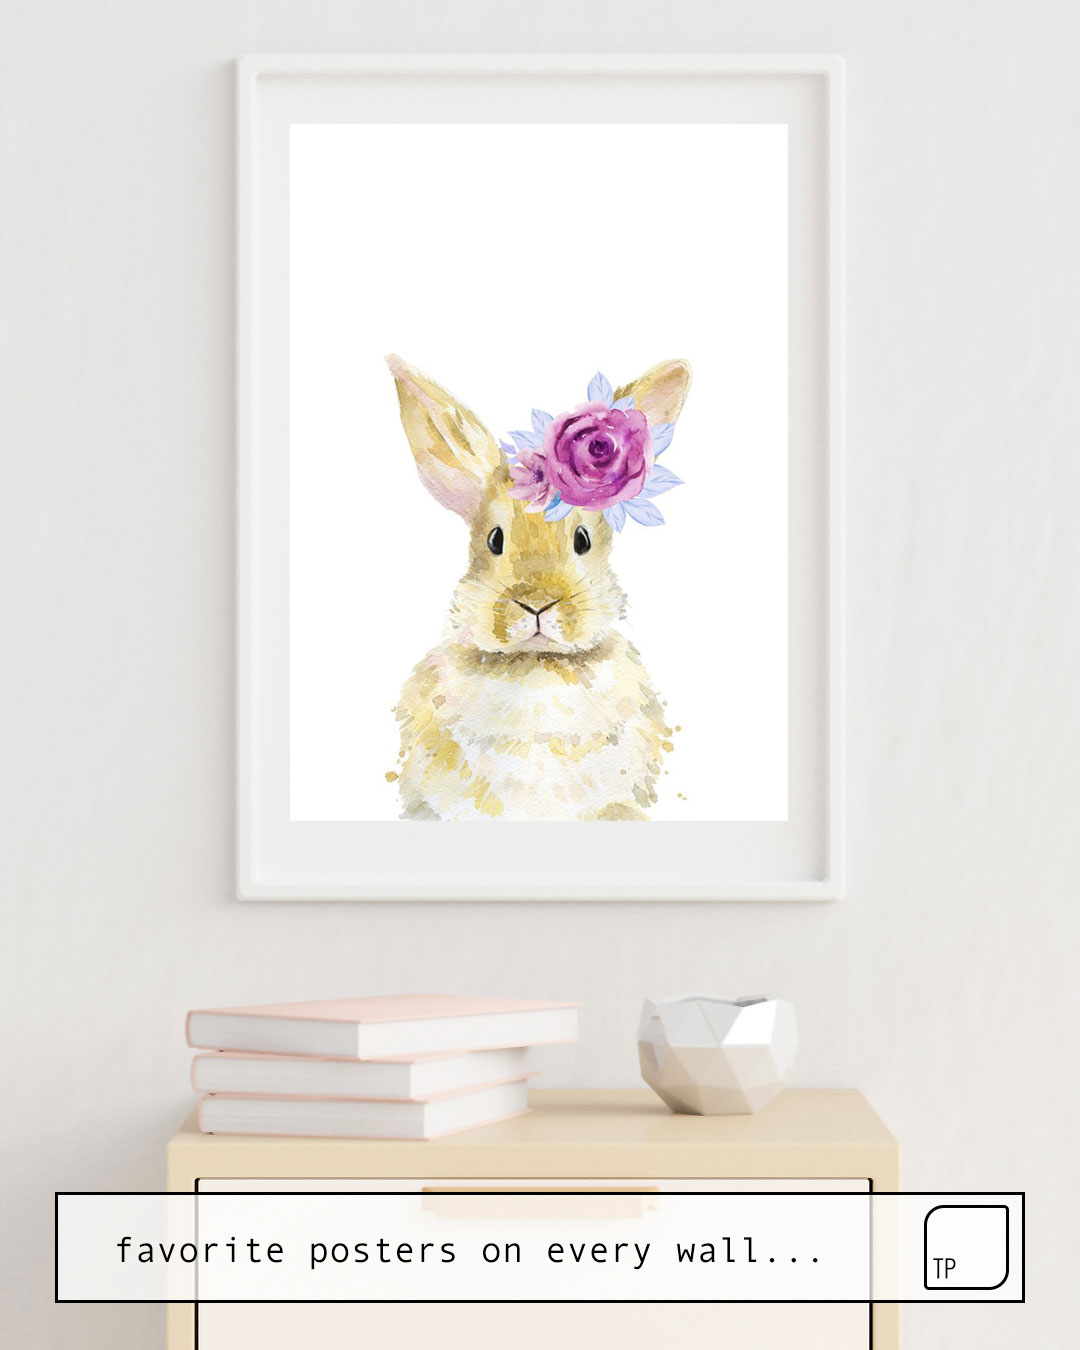 Poster | WATERCOLOUR RABBIT WITH FLOWERS ON THE HEAD. von Art by ASolo